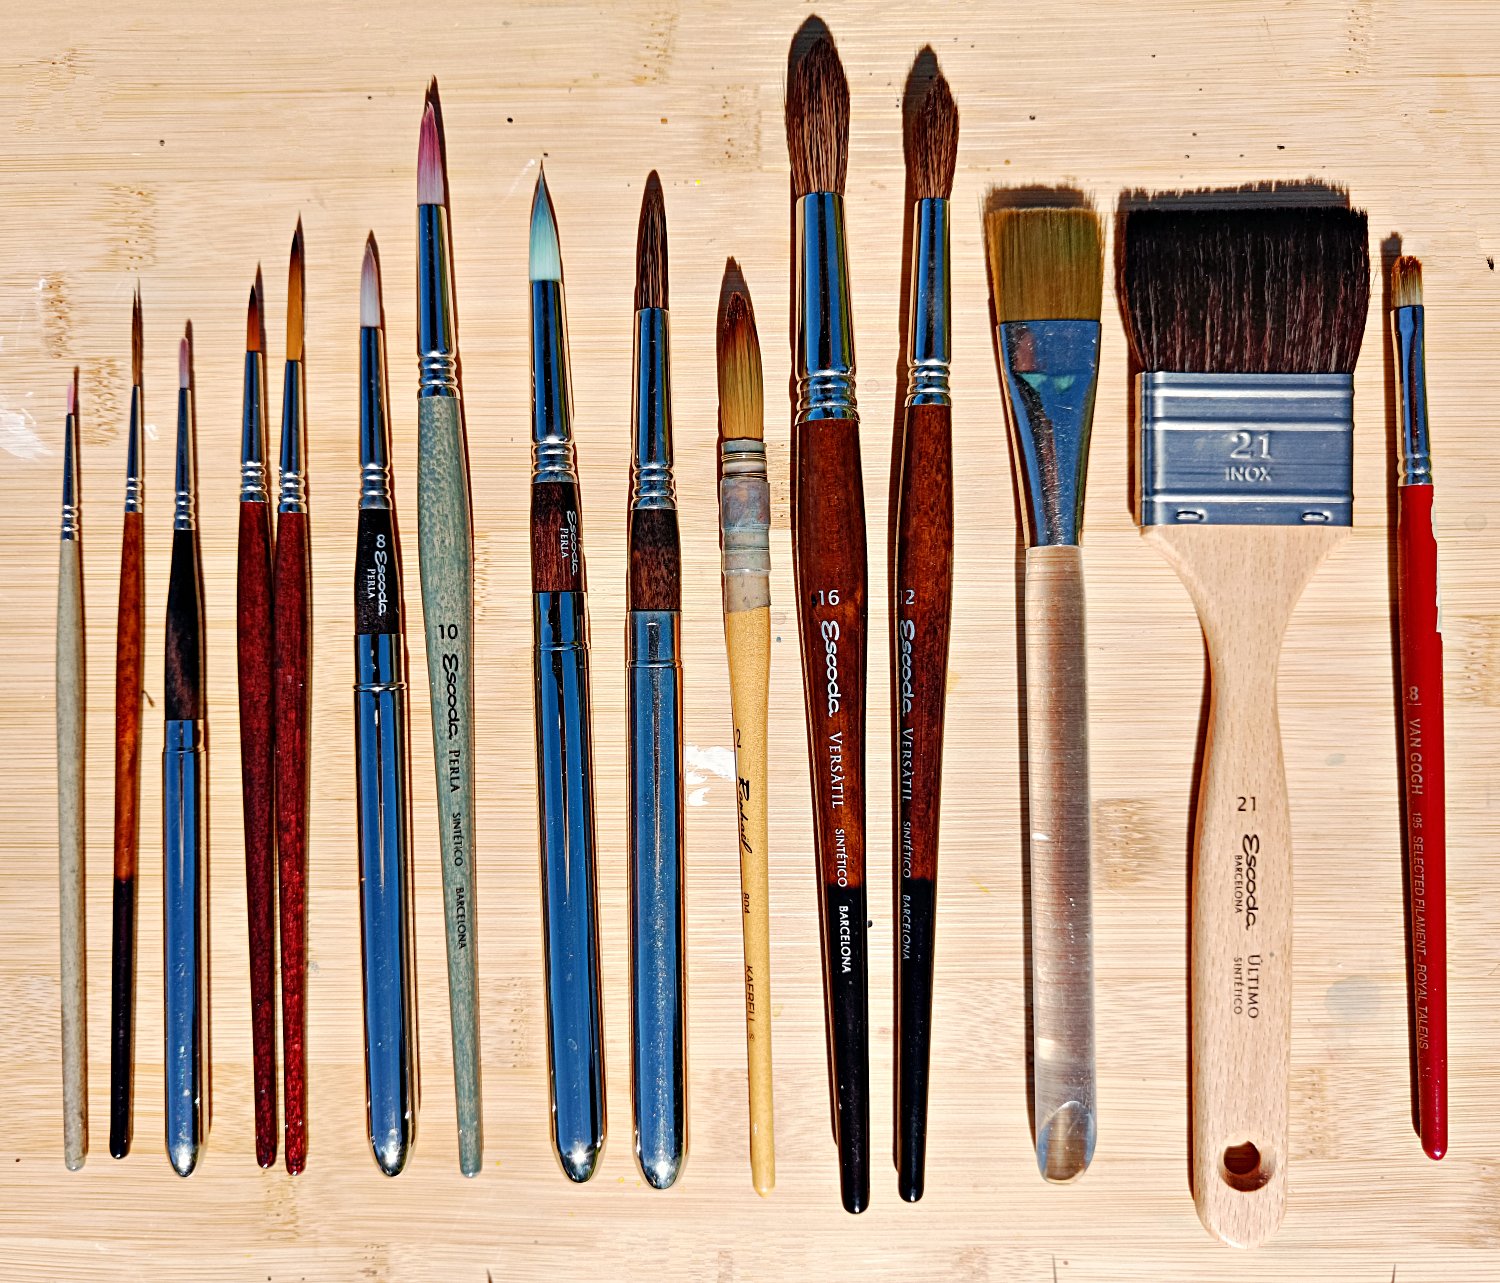 Versatil Travel Brushes by Escoda - High quality artists paint